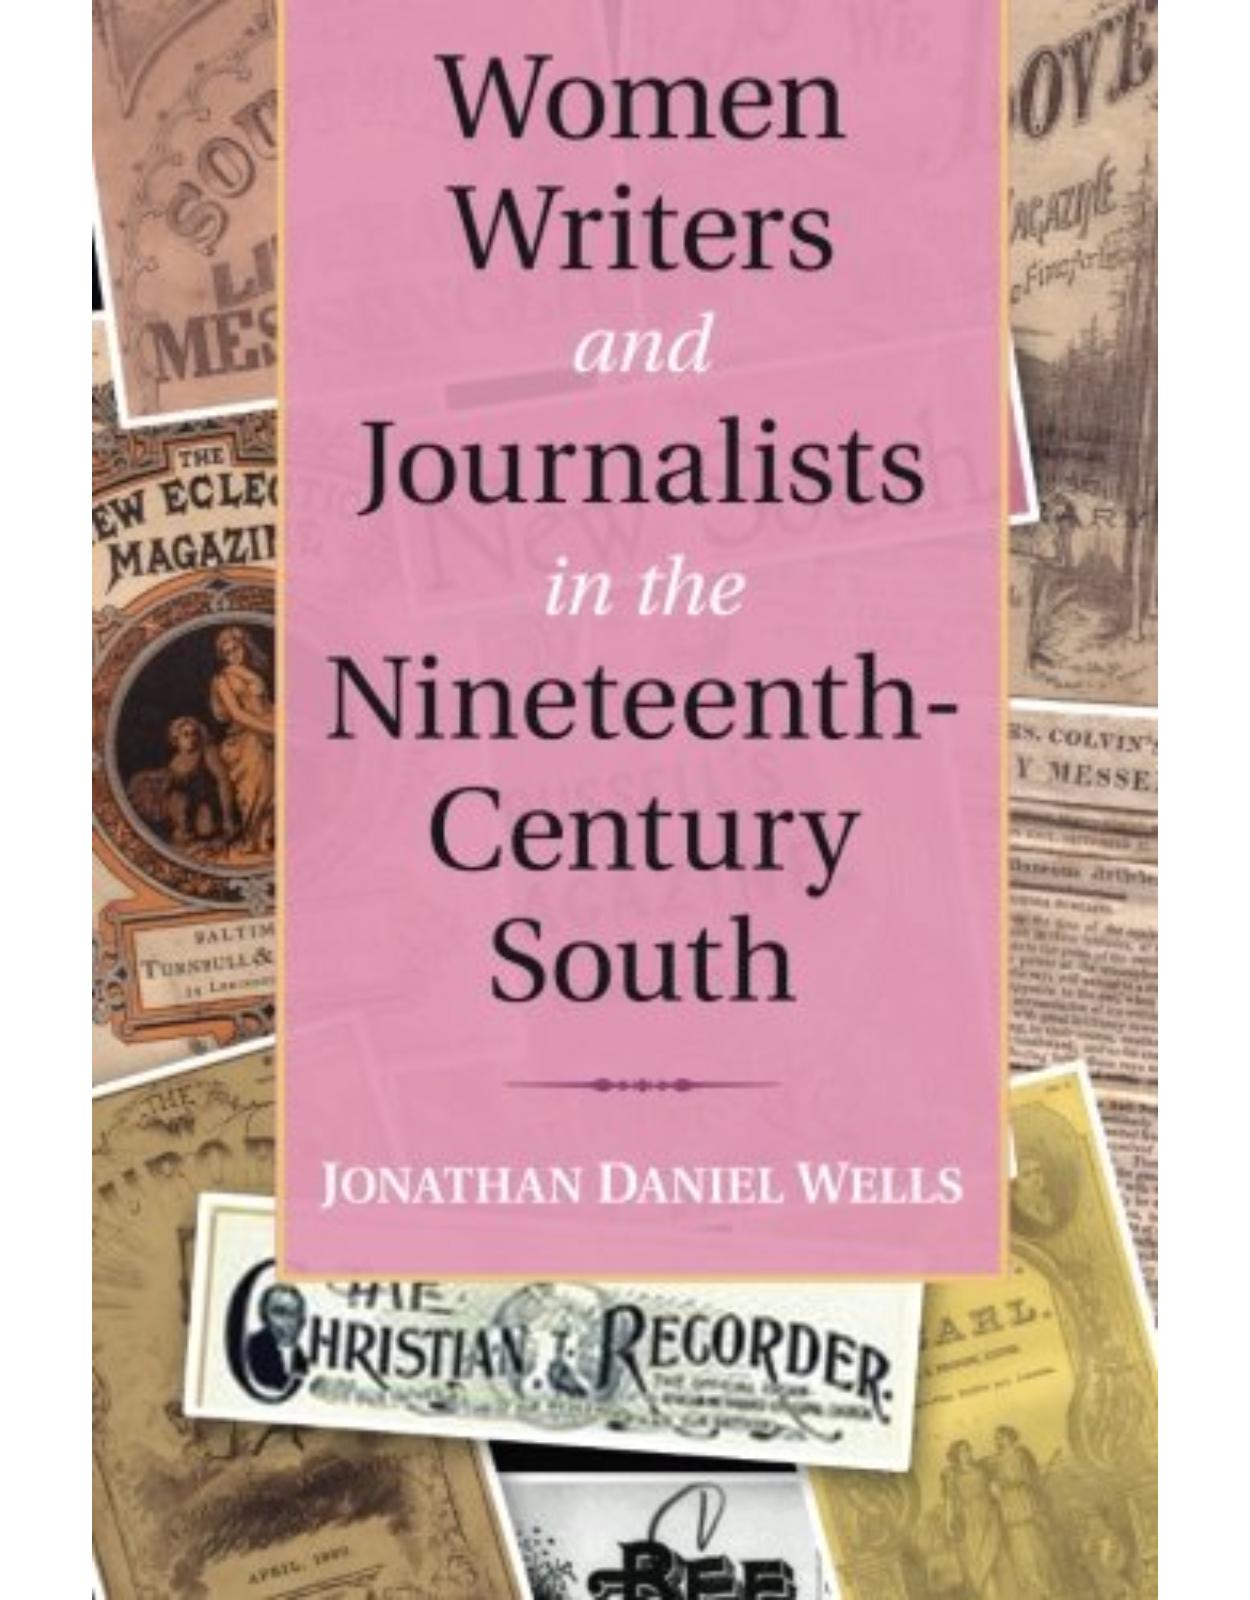 Women Writers and Journalists in the Nineteenth-Century South (Cambridge Studies on the American South)